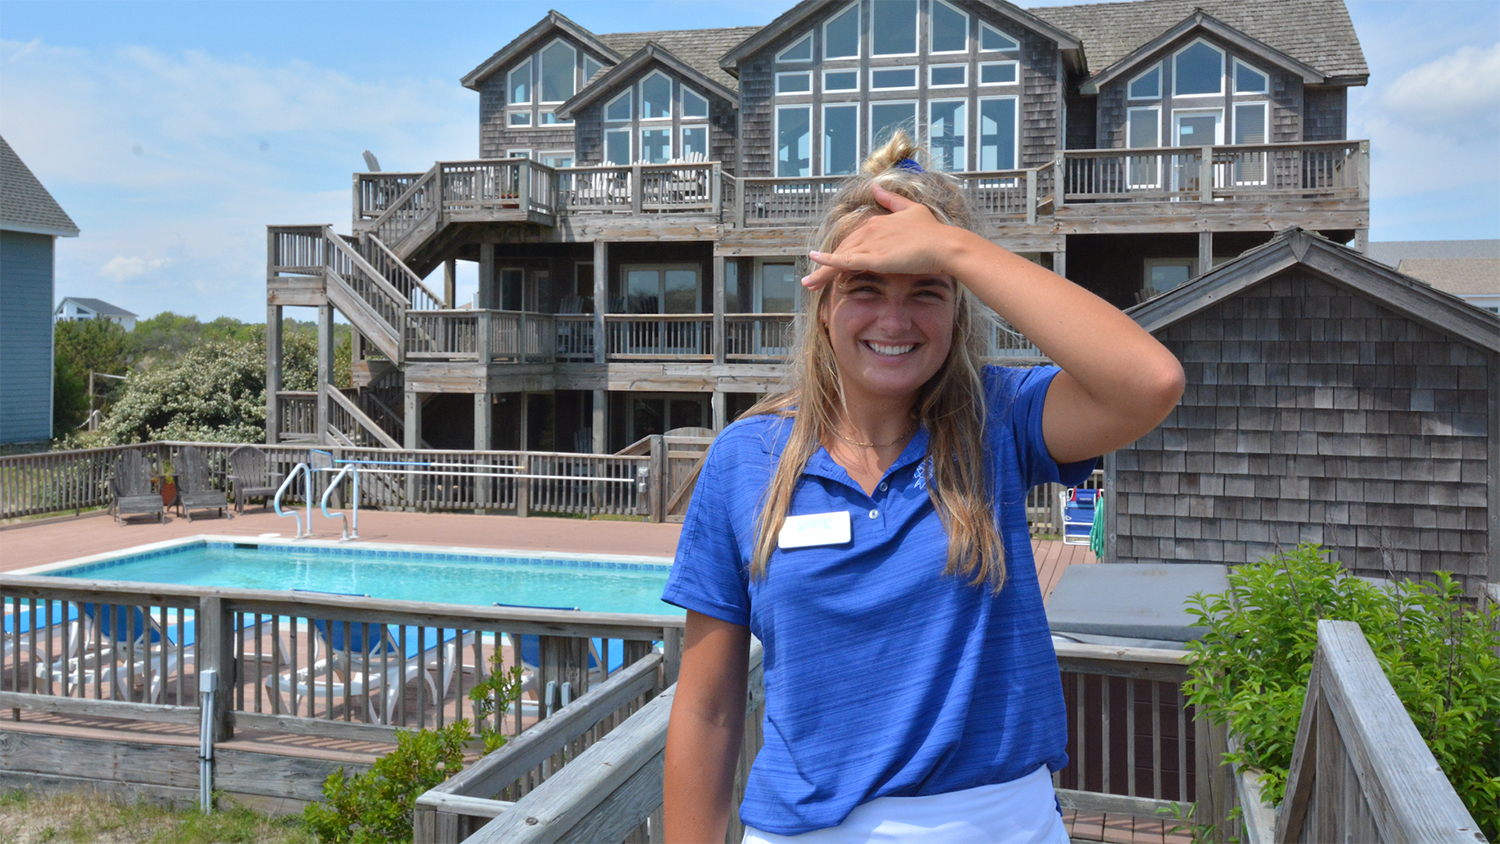 NC State student Micaela Nardino poses for a photo in front of the Twiddy and Company headquarters in Corolla, North Carolina.